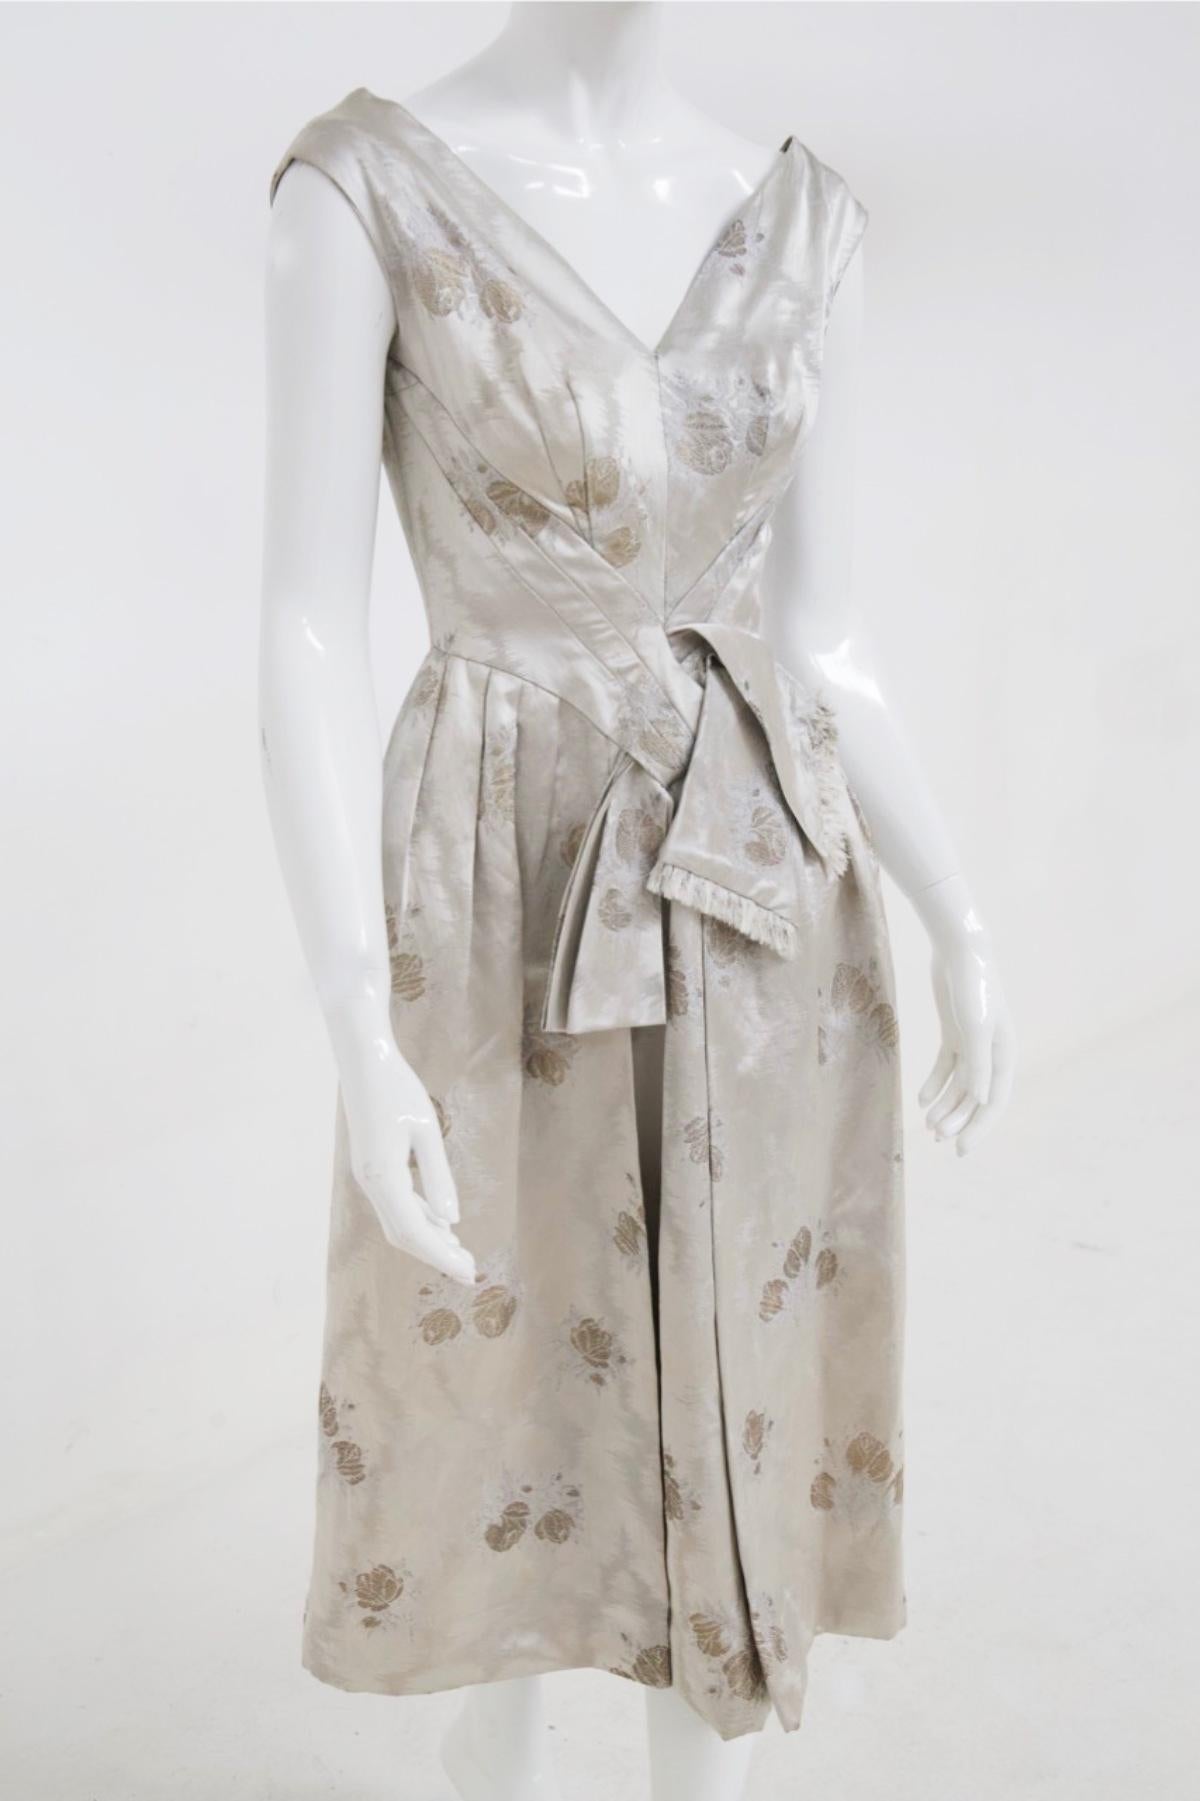 Garish Vintage Tailored Dress in Pearl Gray Silk Satin For Sale 5